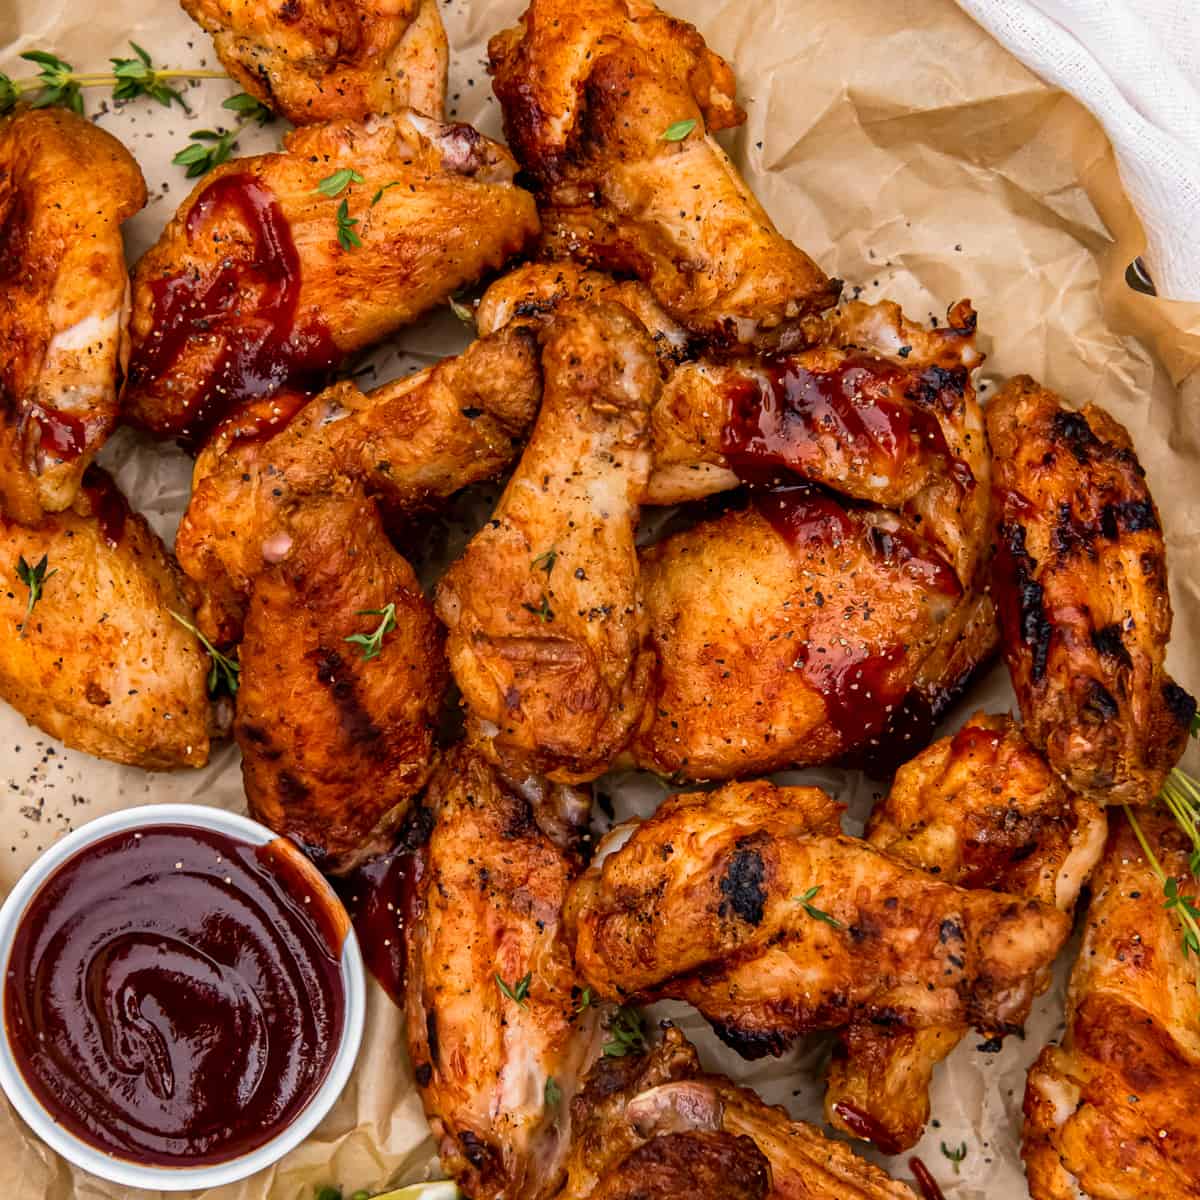 https://www.thecookierookie.com/wp-content/uploads/2022/01/featured-grilled-wings-recipe.jpg